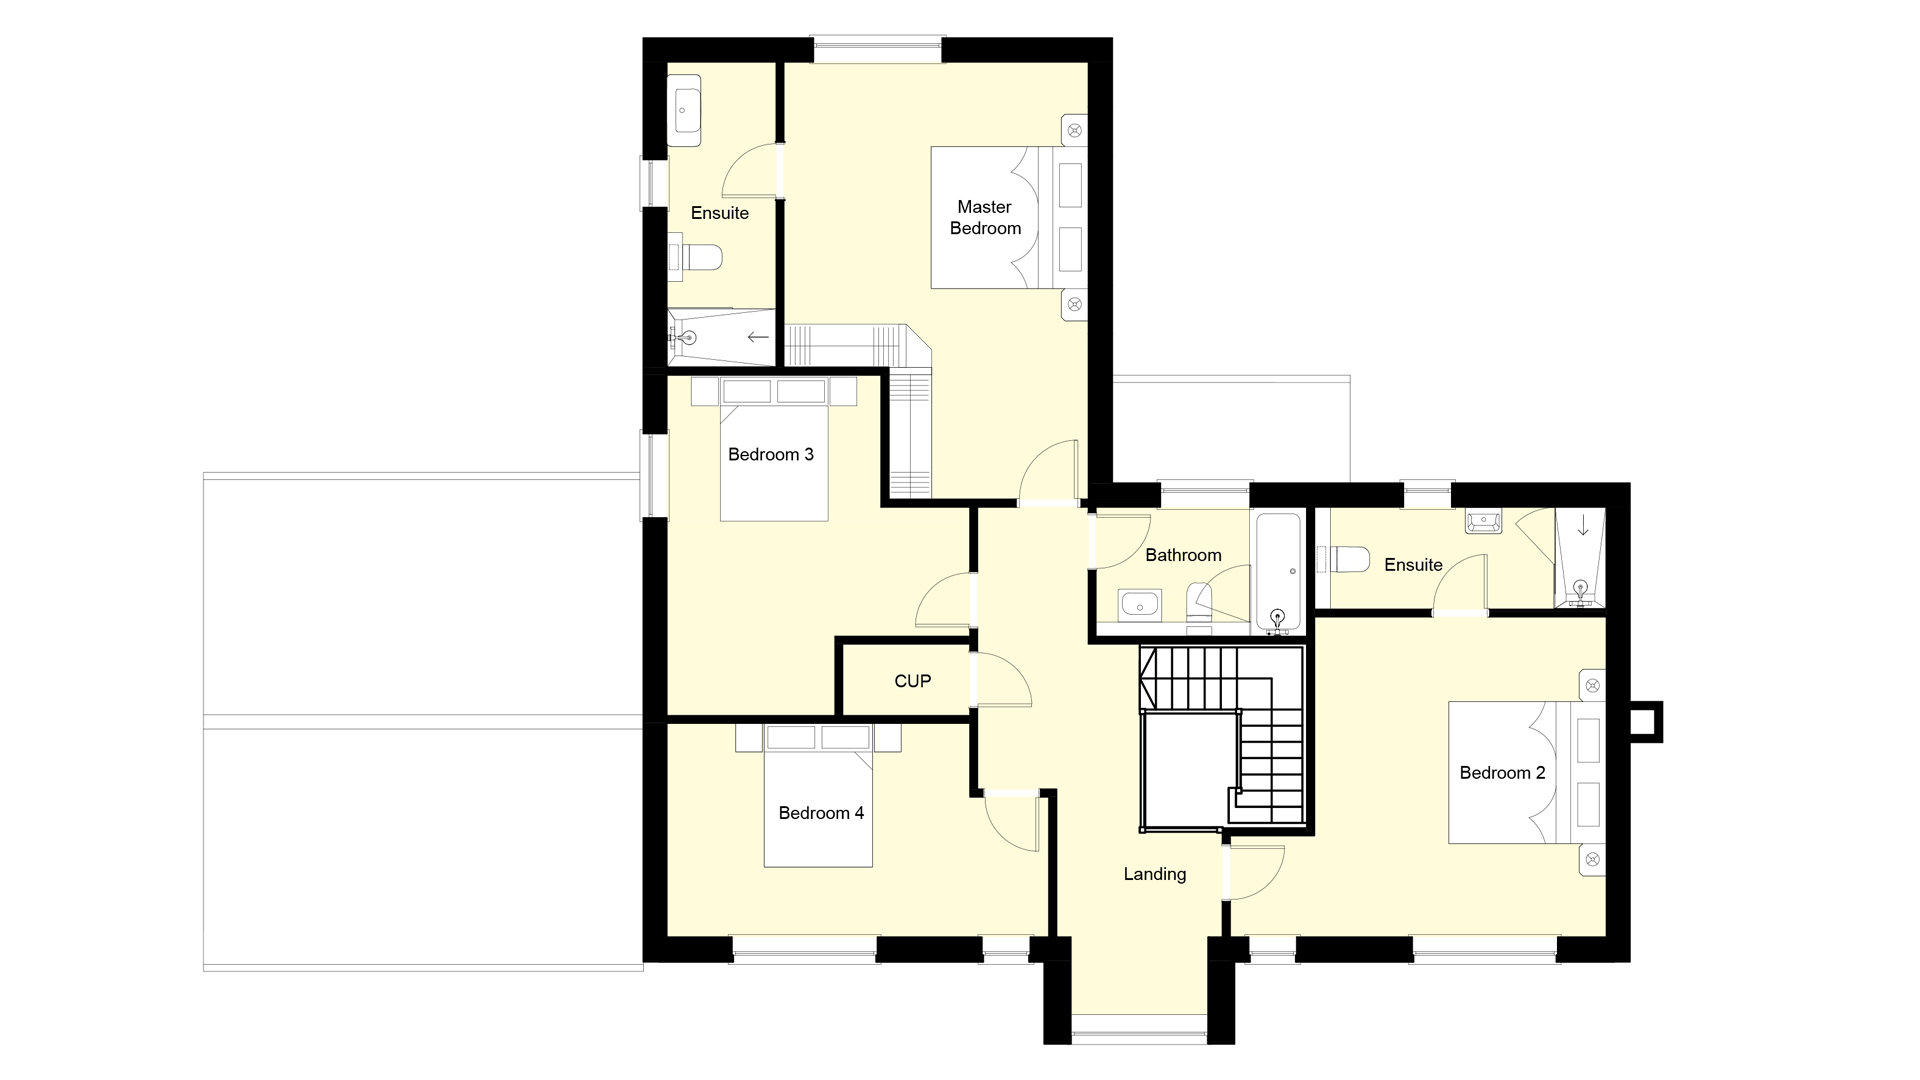 Layout of the first floor at Plot 14 Weavers park.